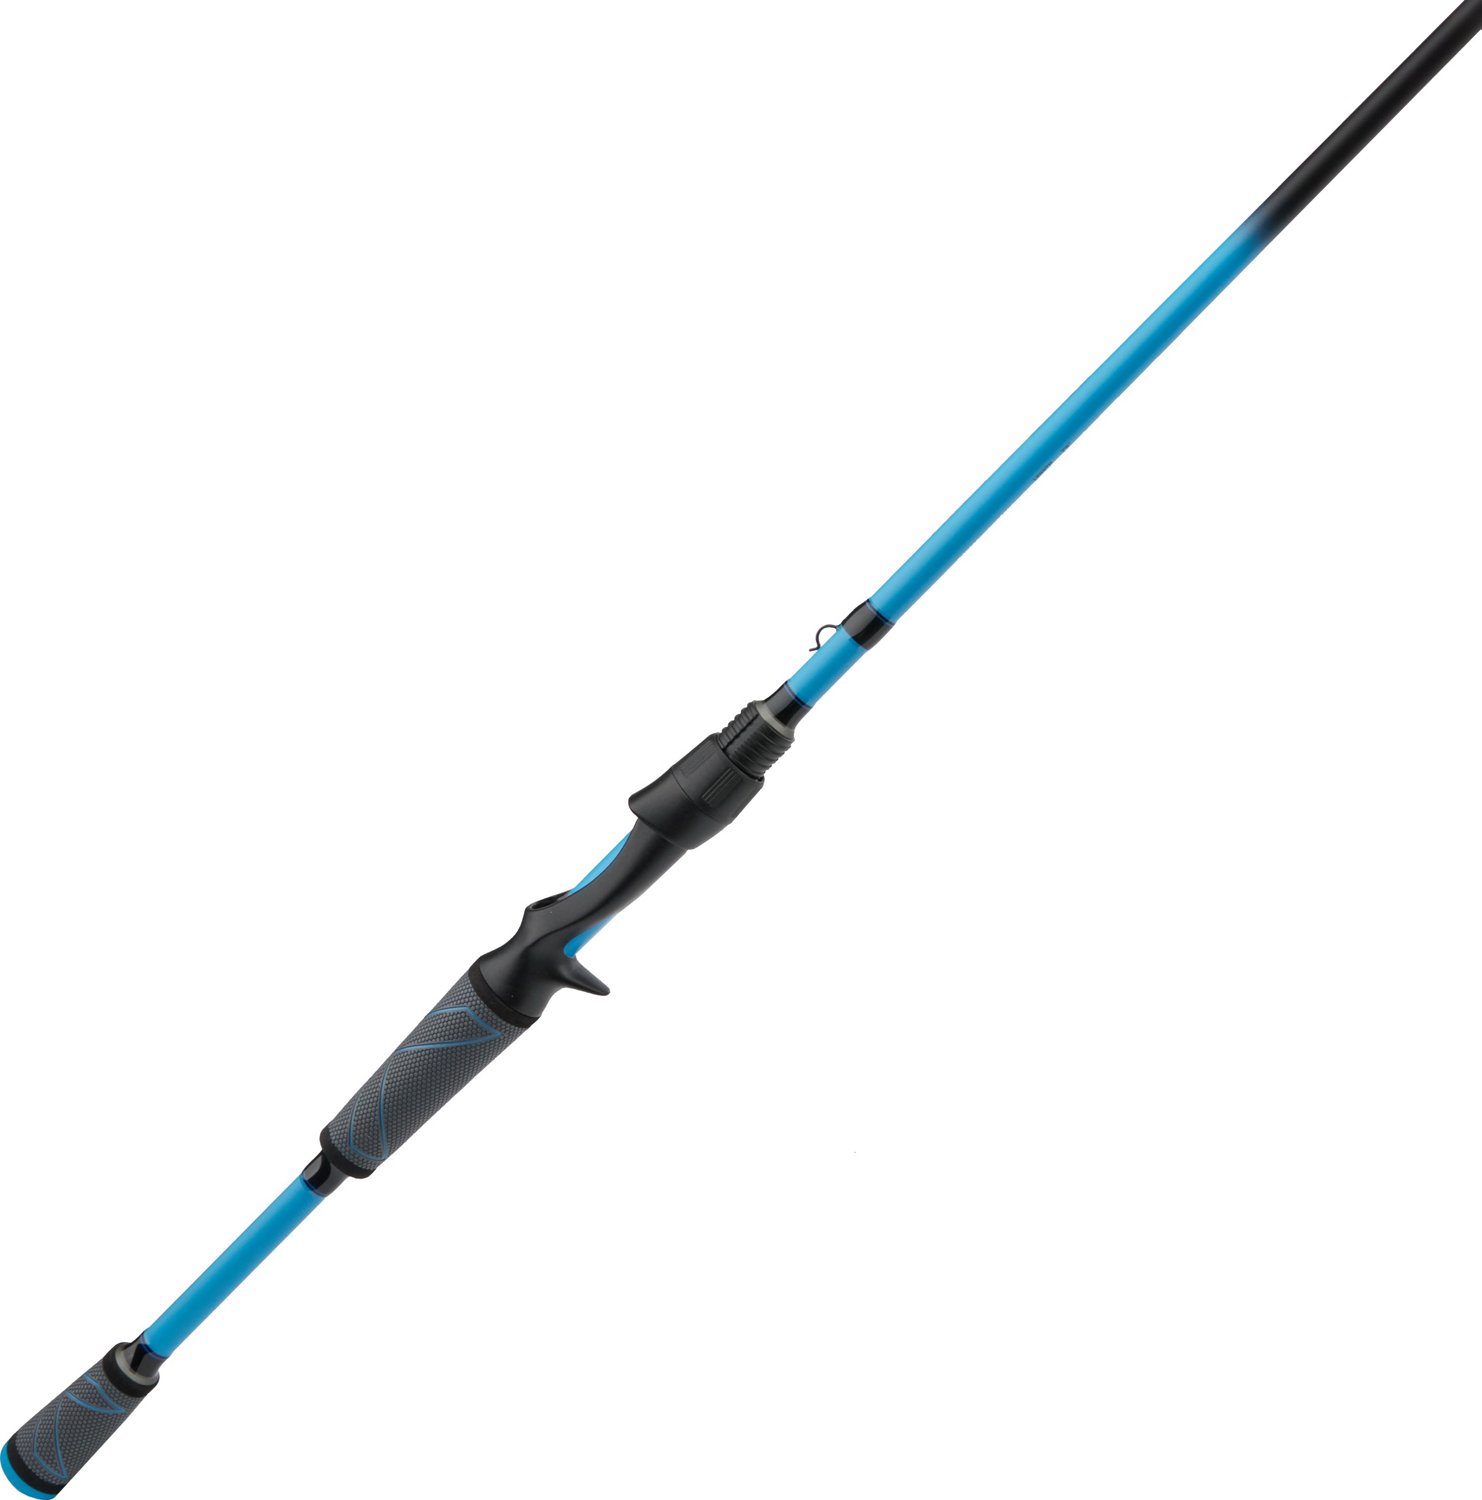 20% Off Fishing Rods, Reels + More - Academy Sports + Outdoors